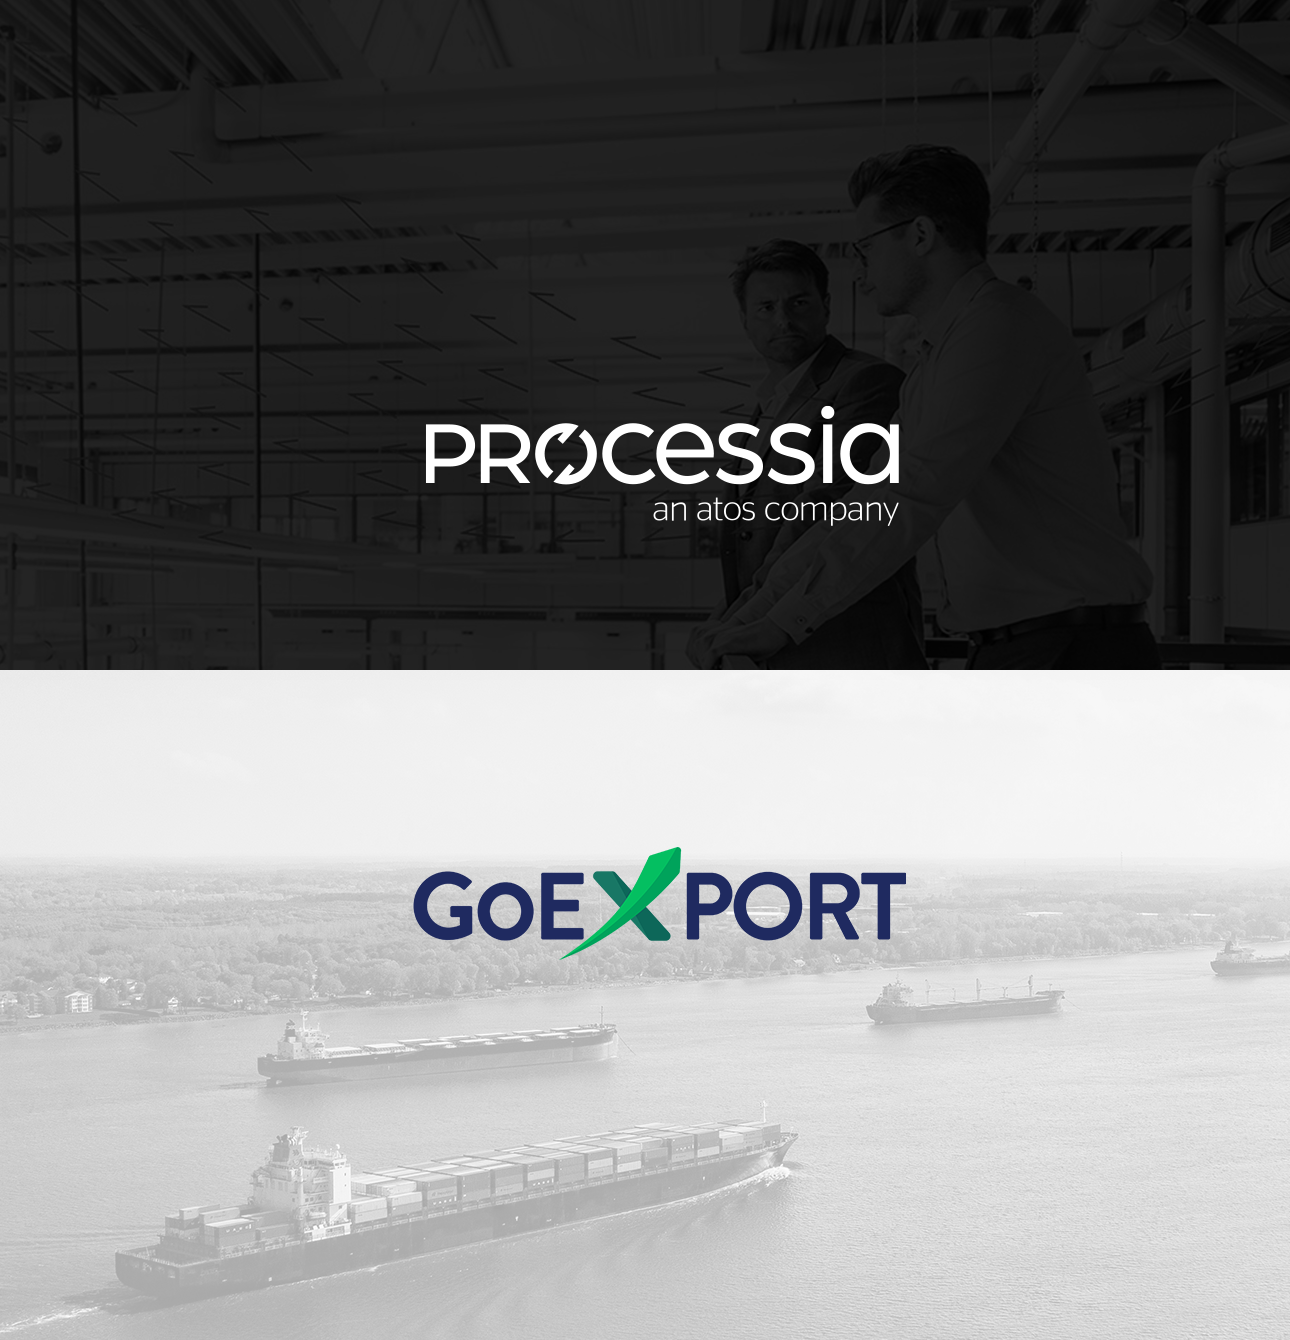 New clients Goexport and Processia